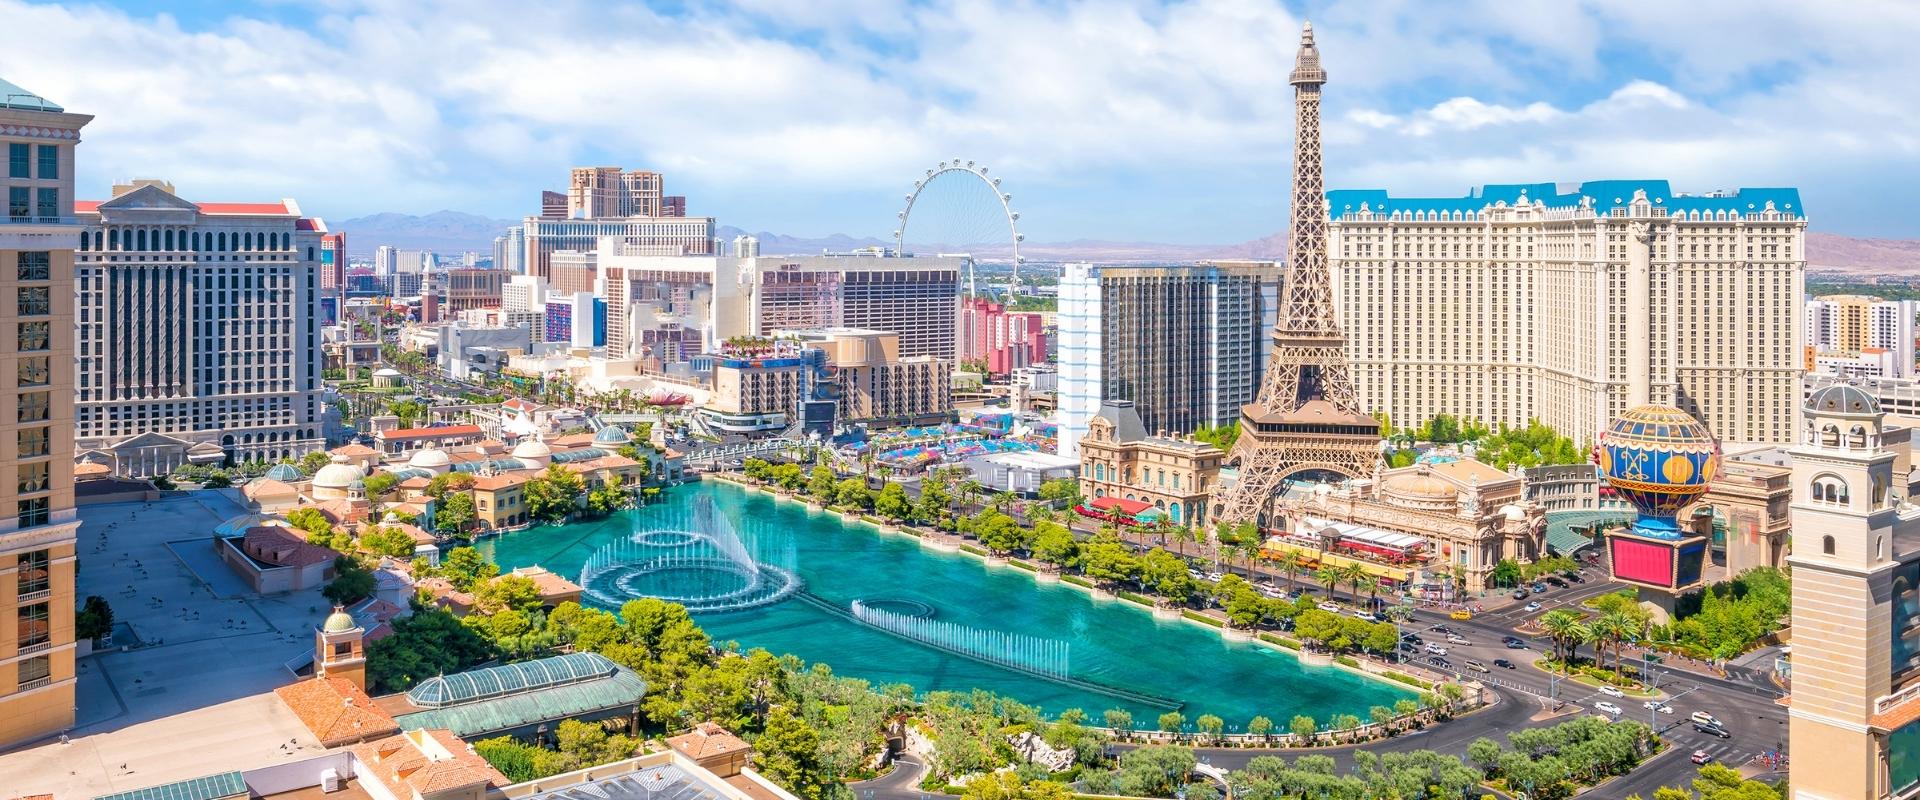 Las Vegas Holidays & Honeymoons 2024 All Inclusive Packages to Las